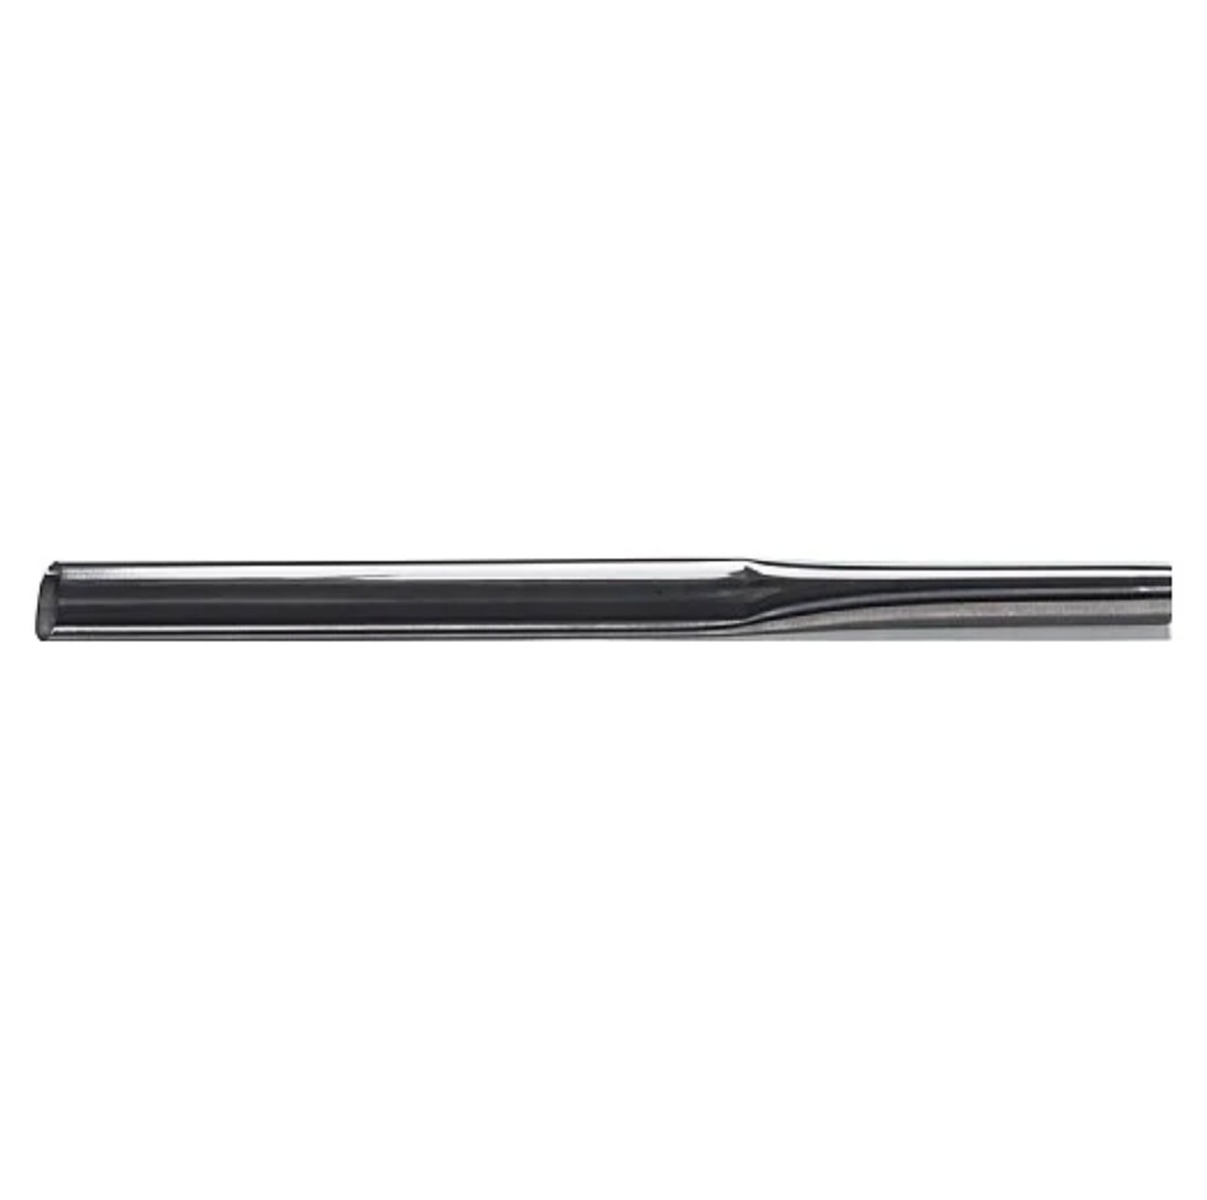 610mm Stainless Steel Crevice Tool (32mm)